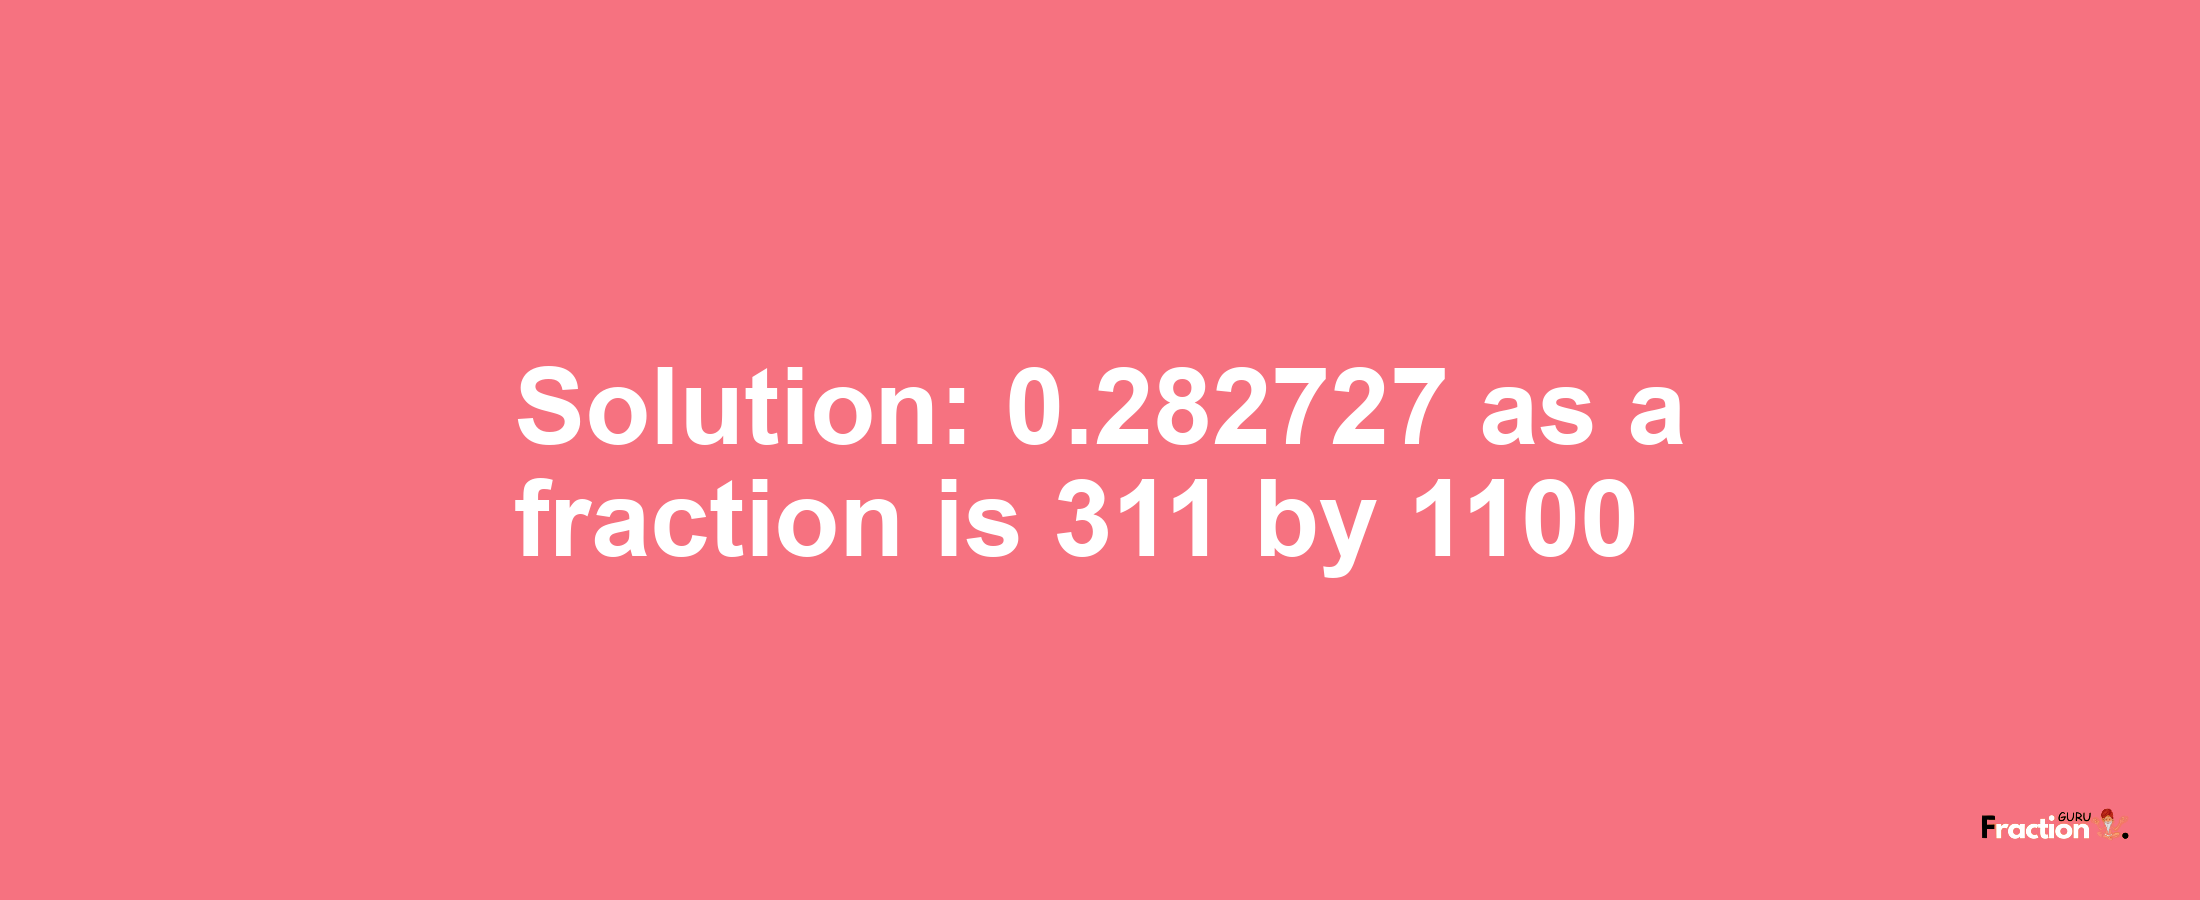 Solution:0.282727 as a fraction is 311/1100